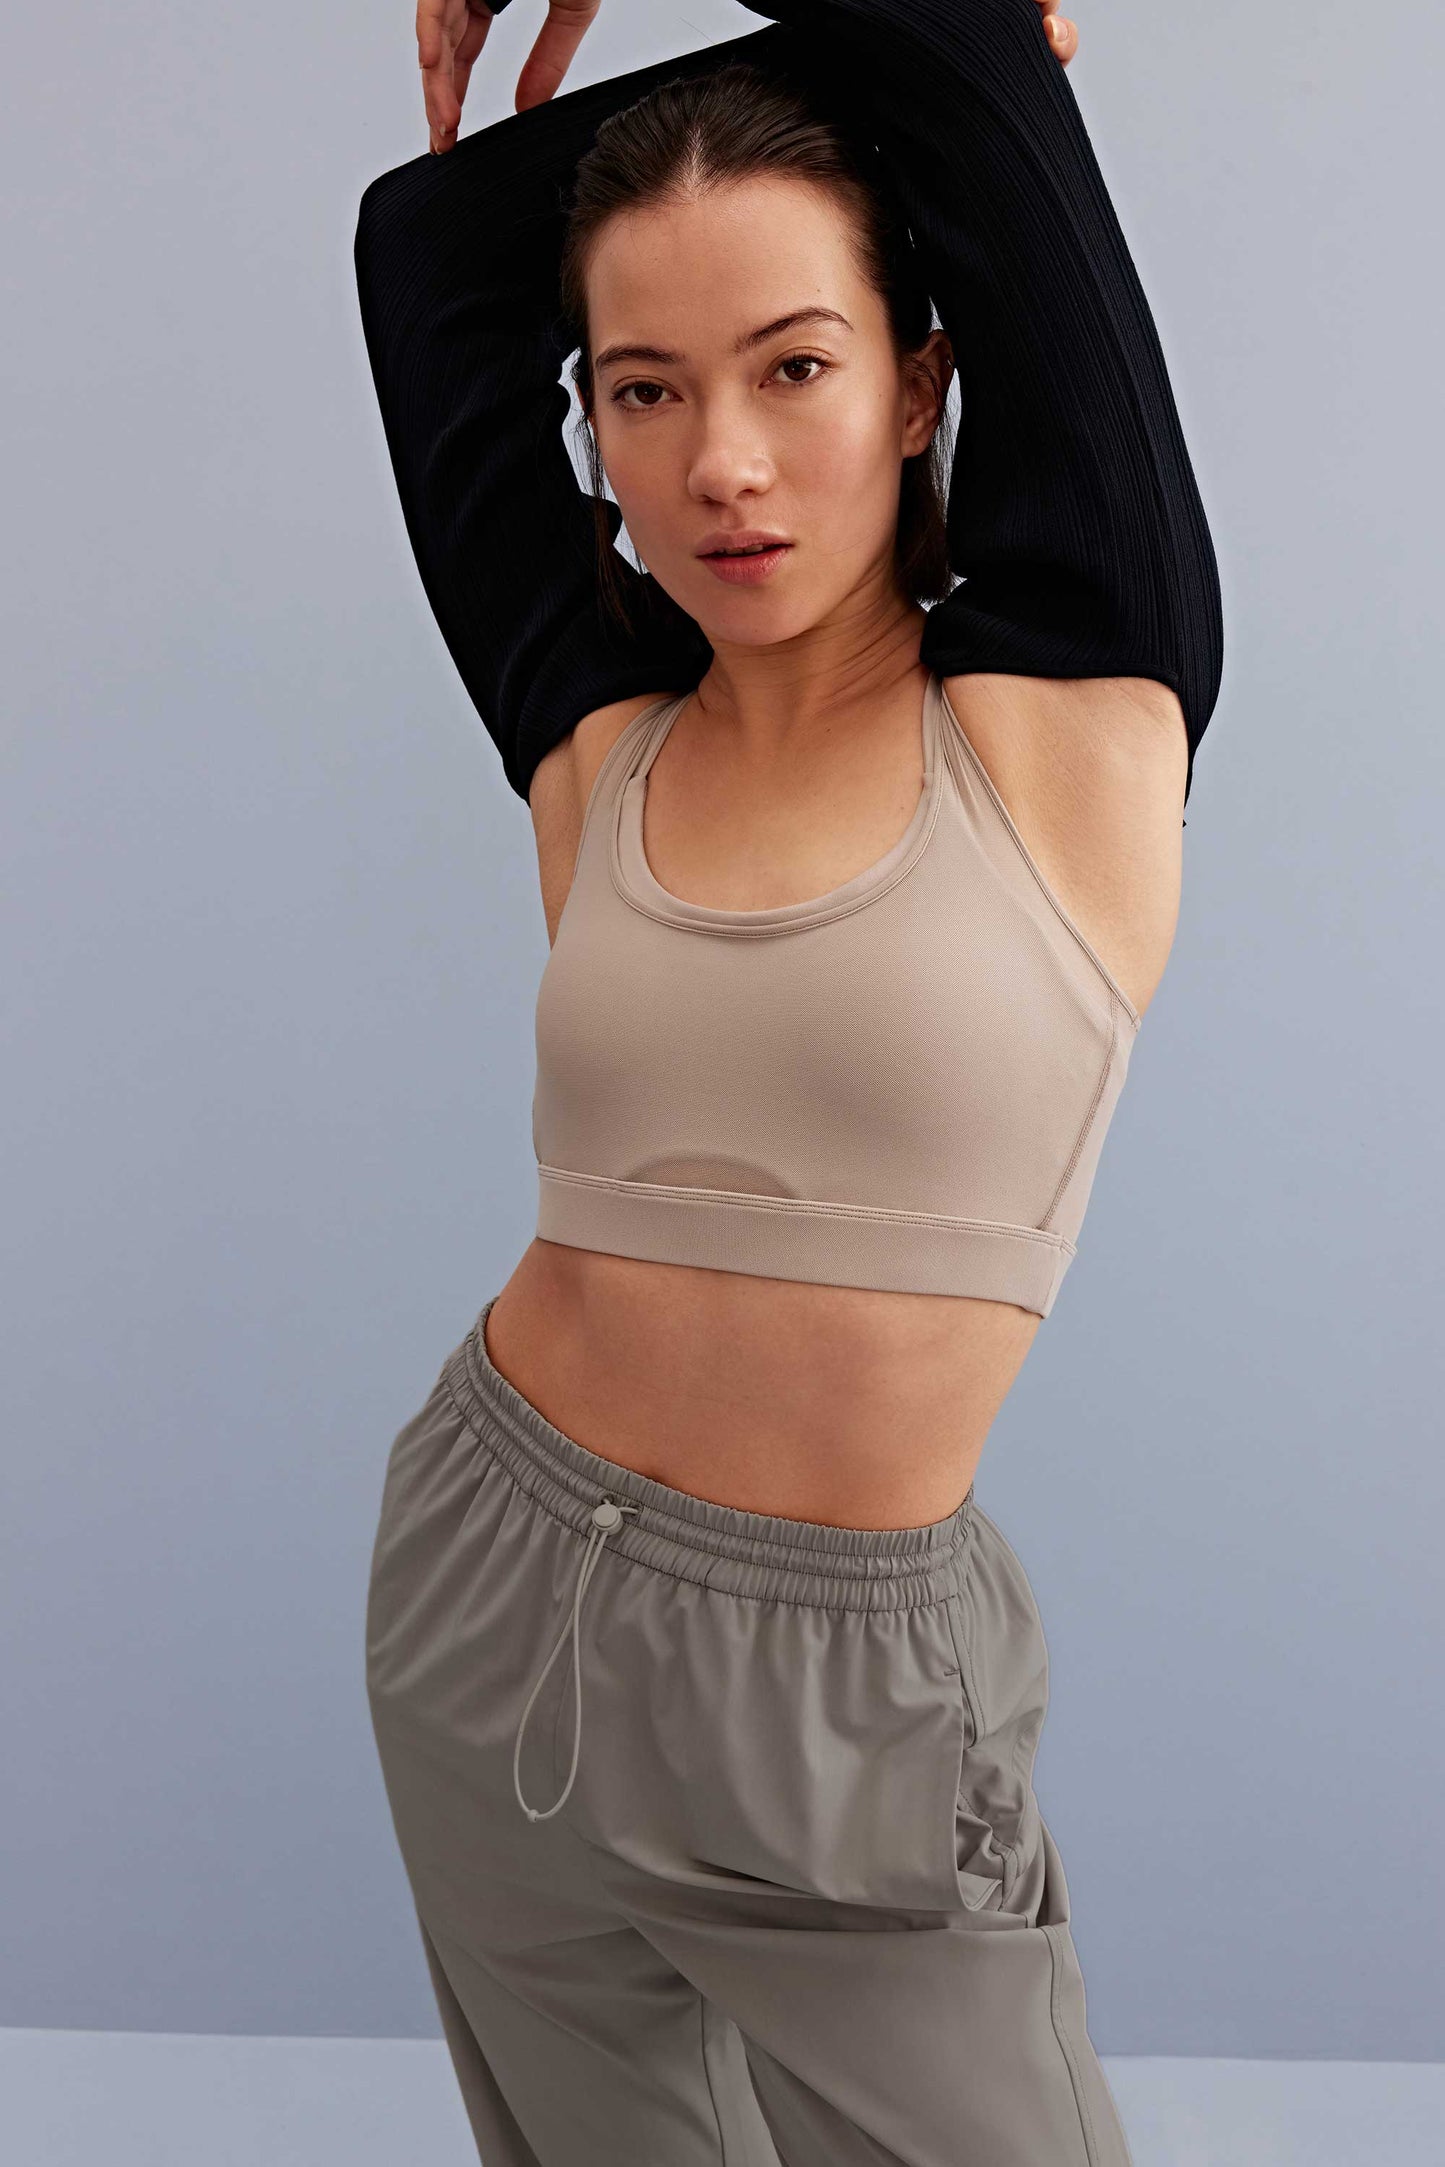 a woman wearing a black shrug and light grey sports bra and grey pants.